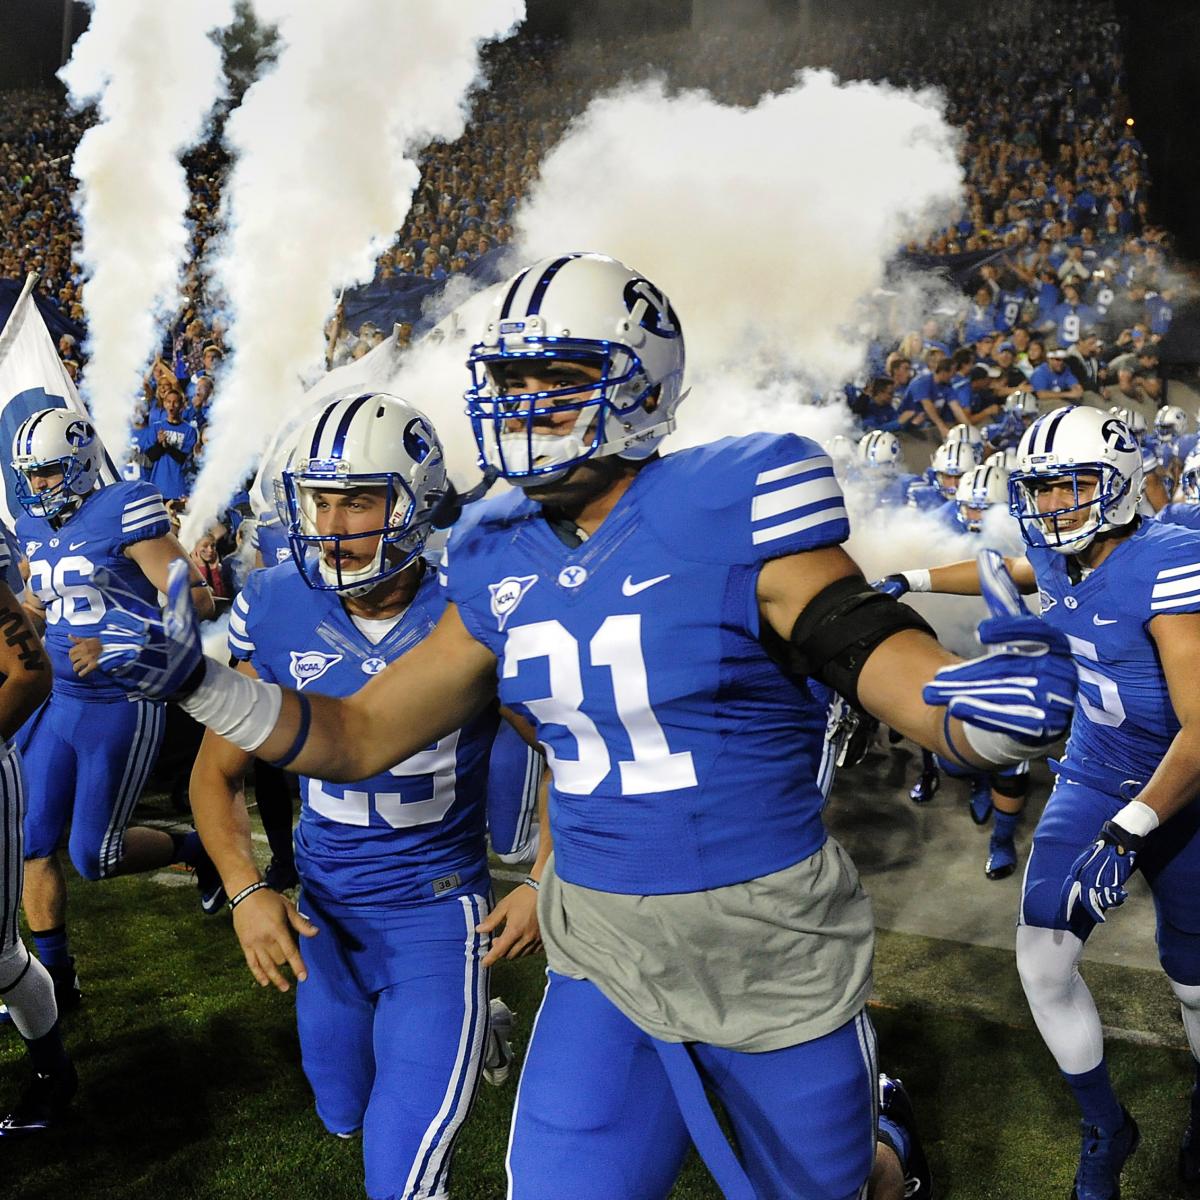 BYU Cougars vs. UNLV Rebels Complete Game Preview News, Scores